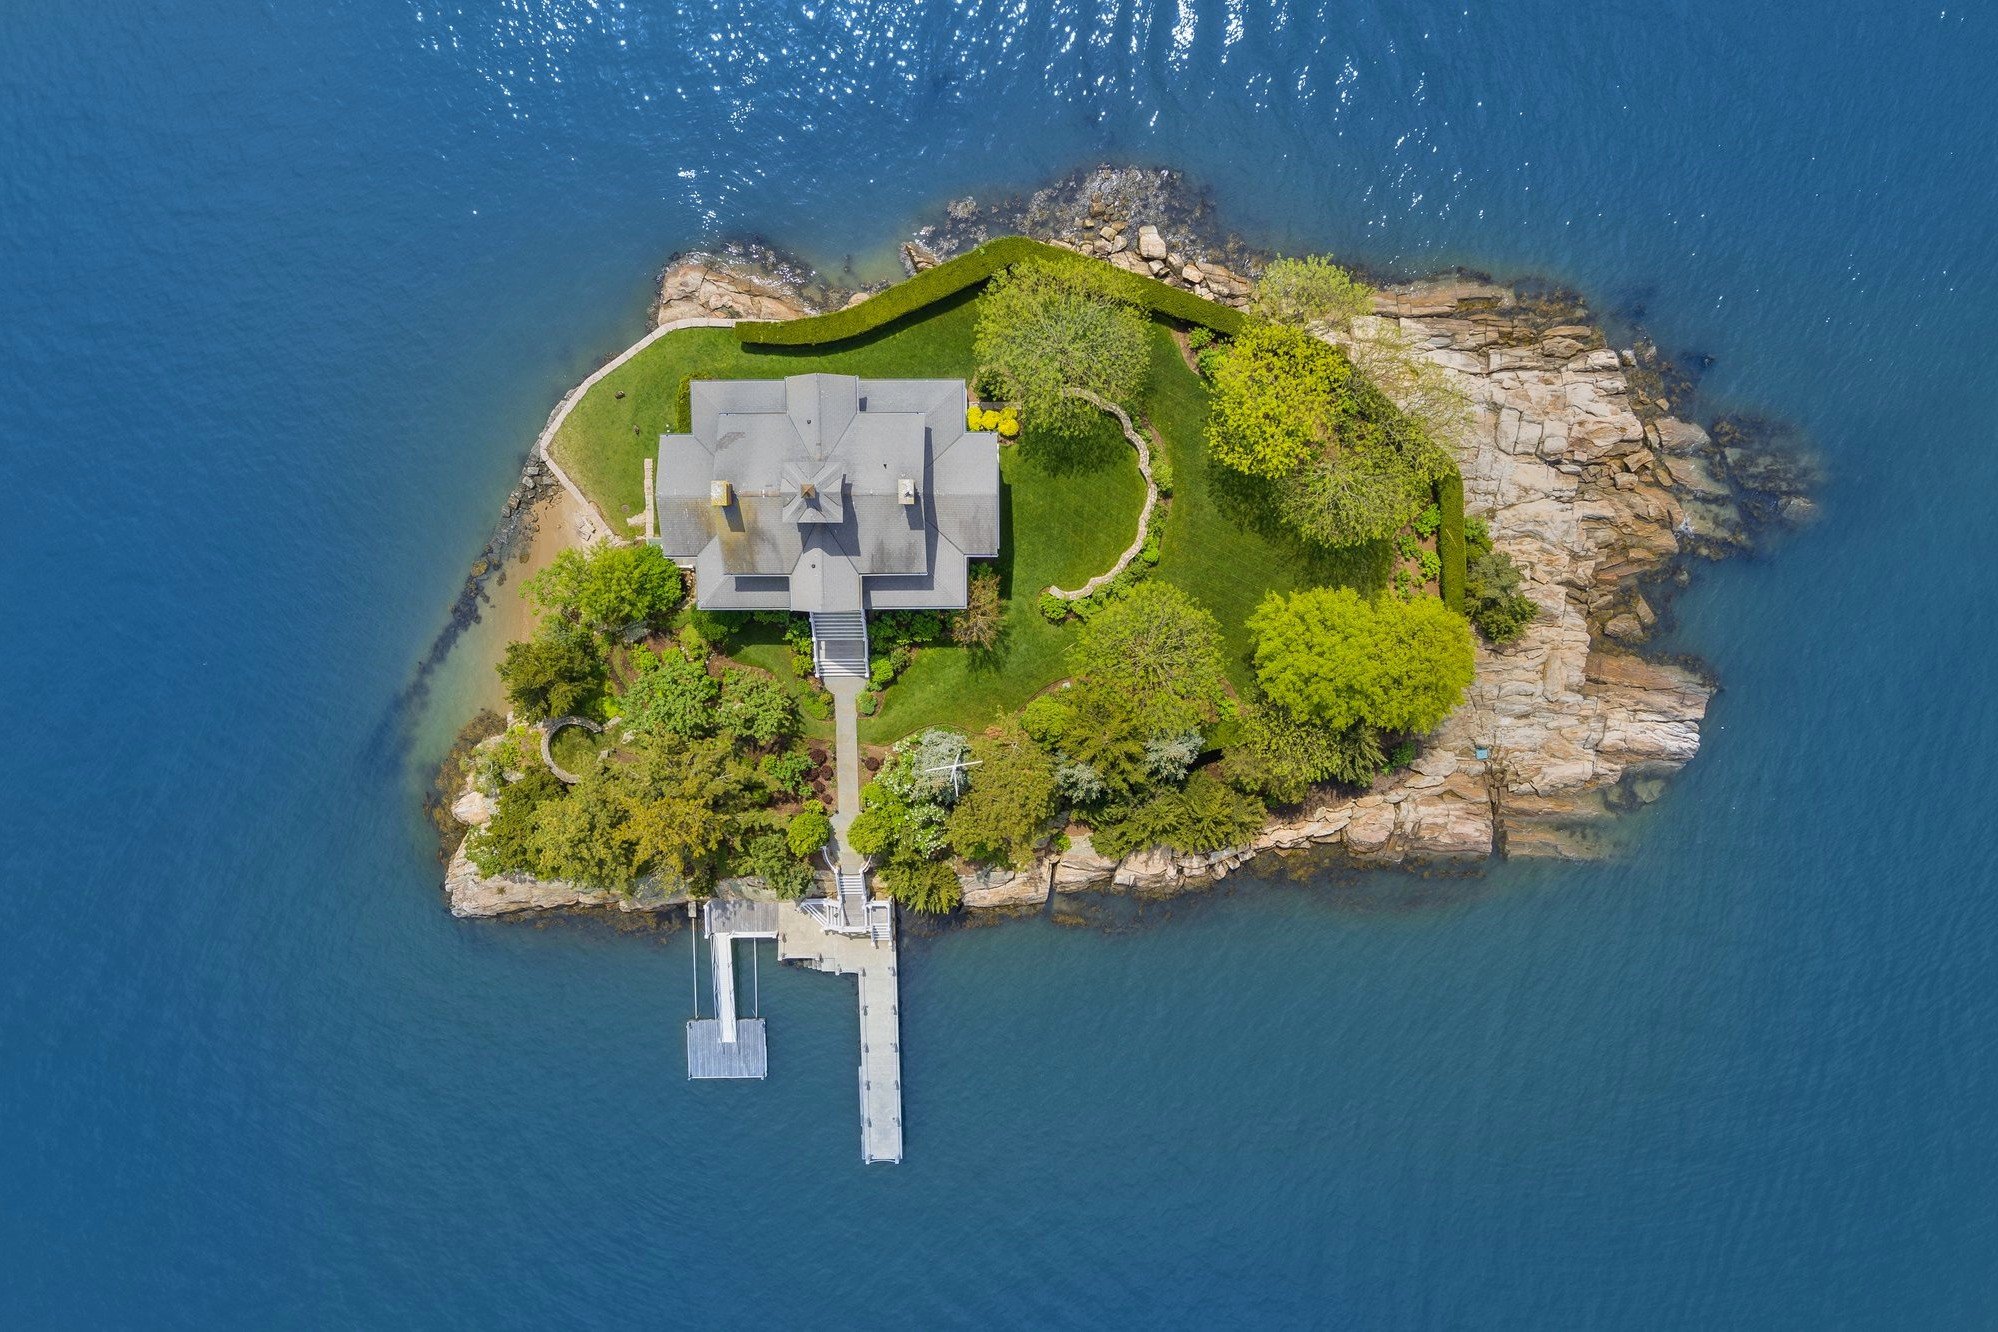 How much is it to visit a private island: Private Island in Branford, Connecticut, USA, $3,000,000.